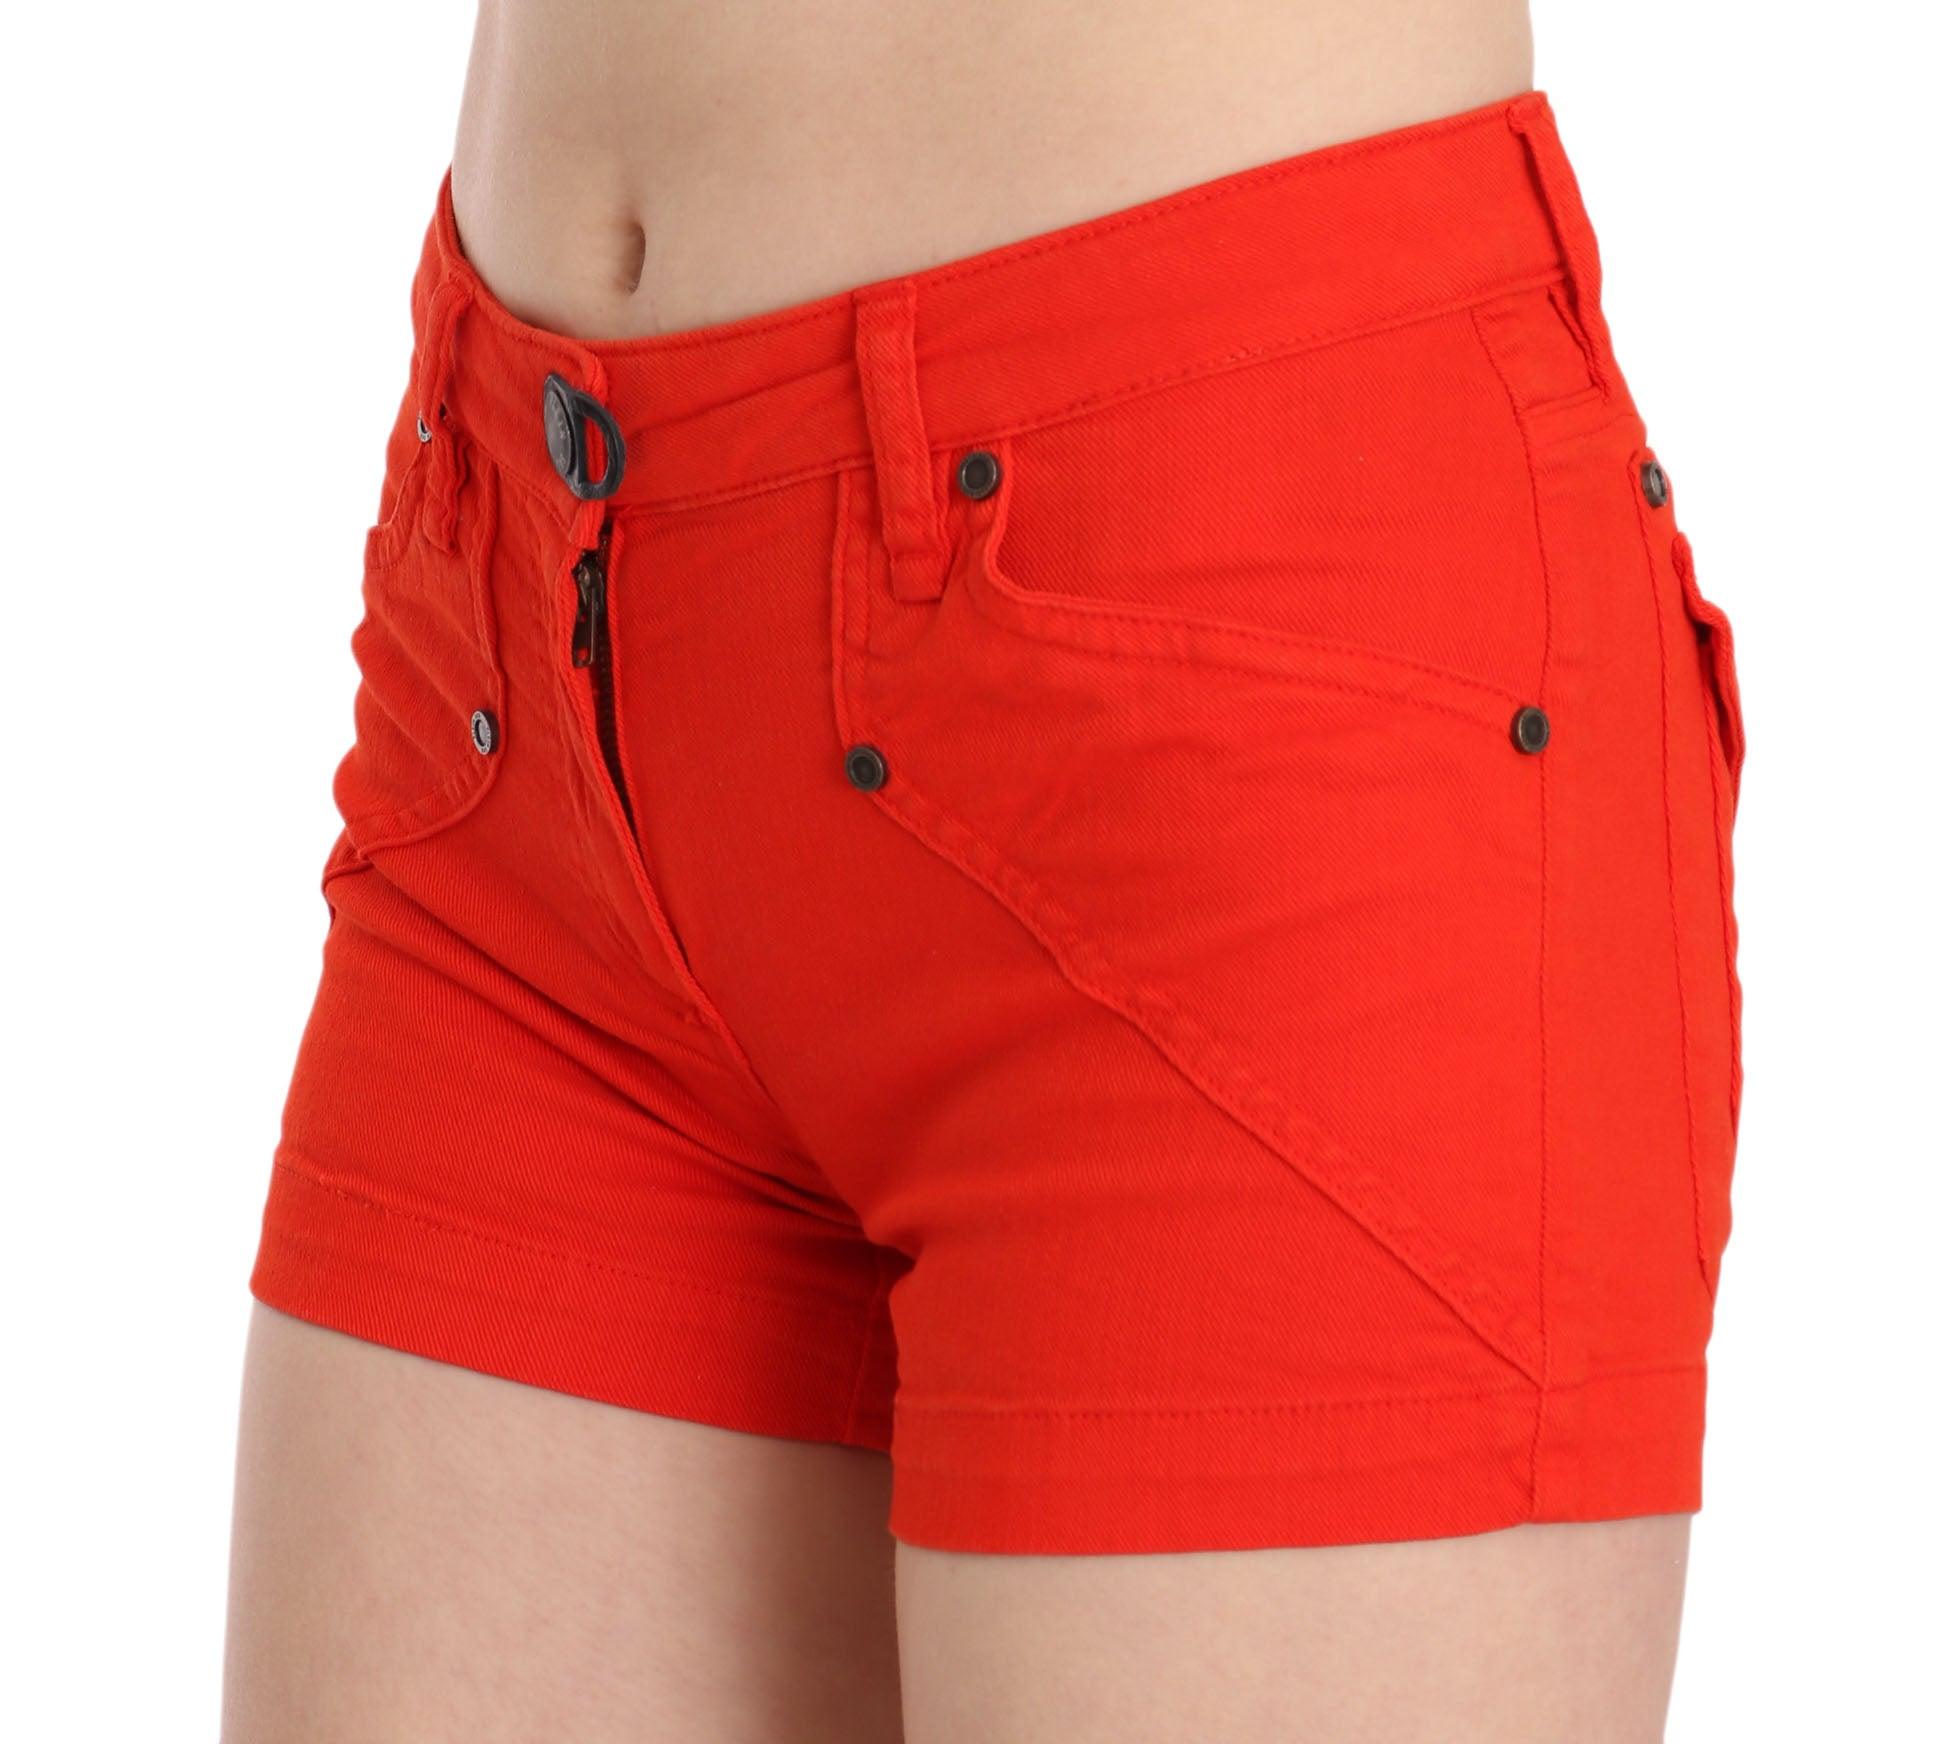 Orange Mid Waist Cotton Denim Mini designed by PLEIN SUD available from Moon Behind The Hill's Women's Clothing range